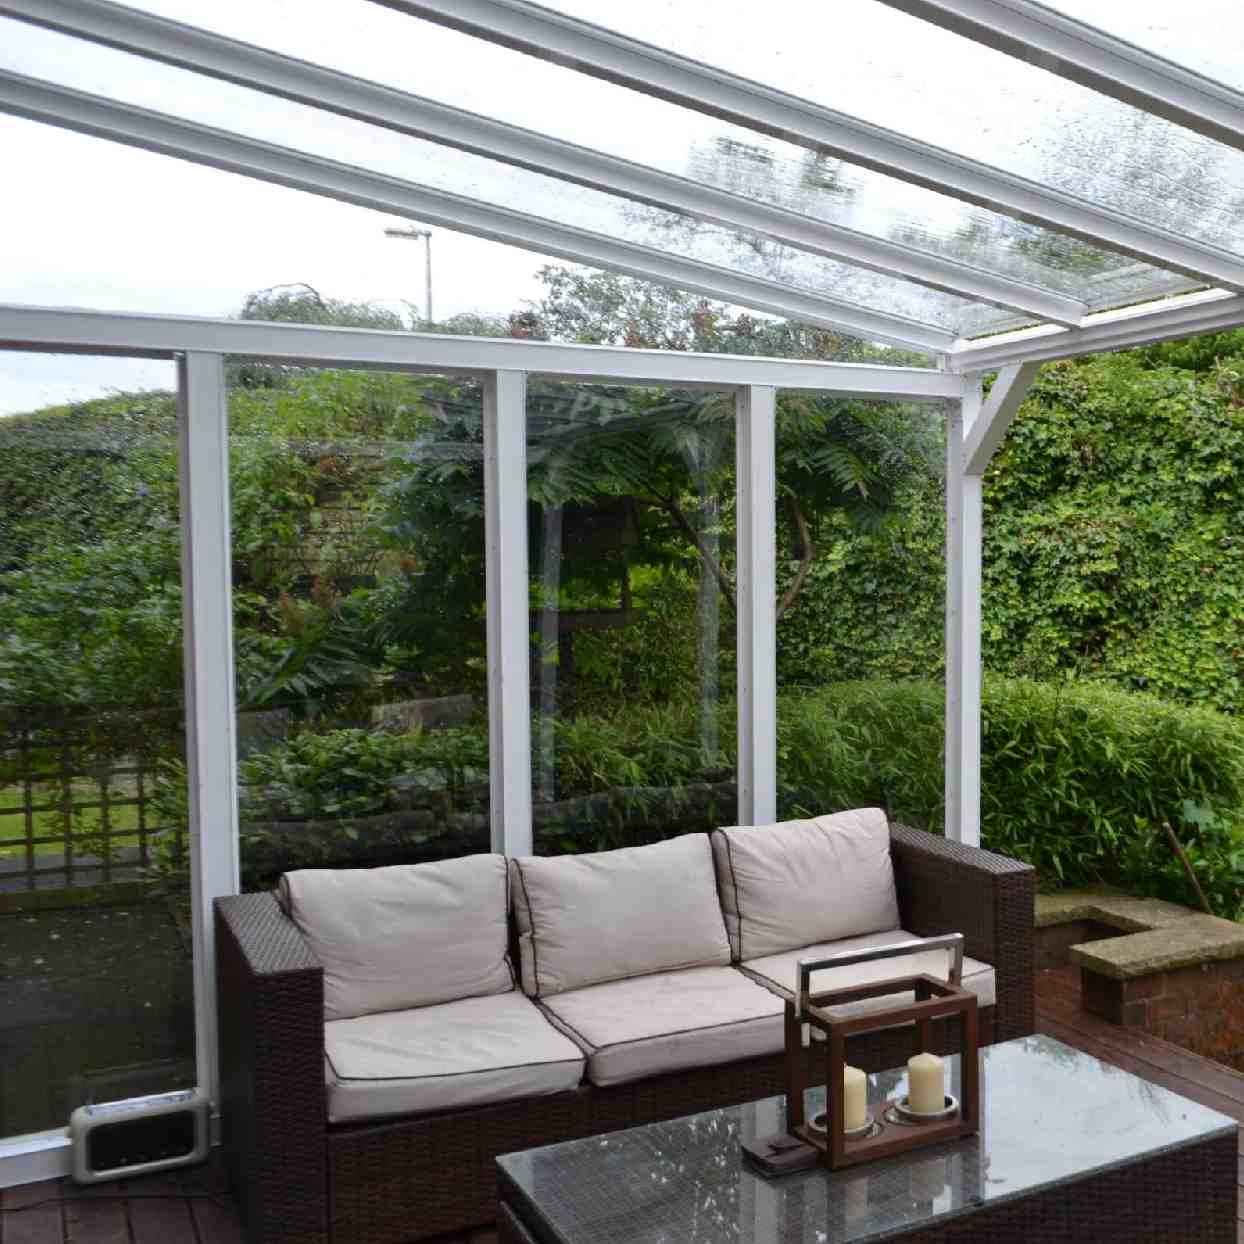 Buy Omega Verandah White with 6mm Glass Clear Plate Polycarbonate Glazing - 4.9m (W) x 3.0m (P), (3) Supporting Posts online today